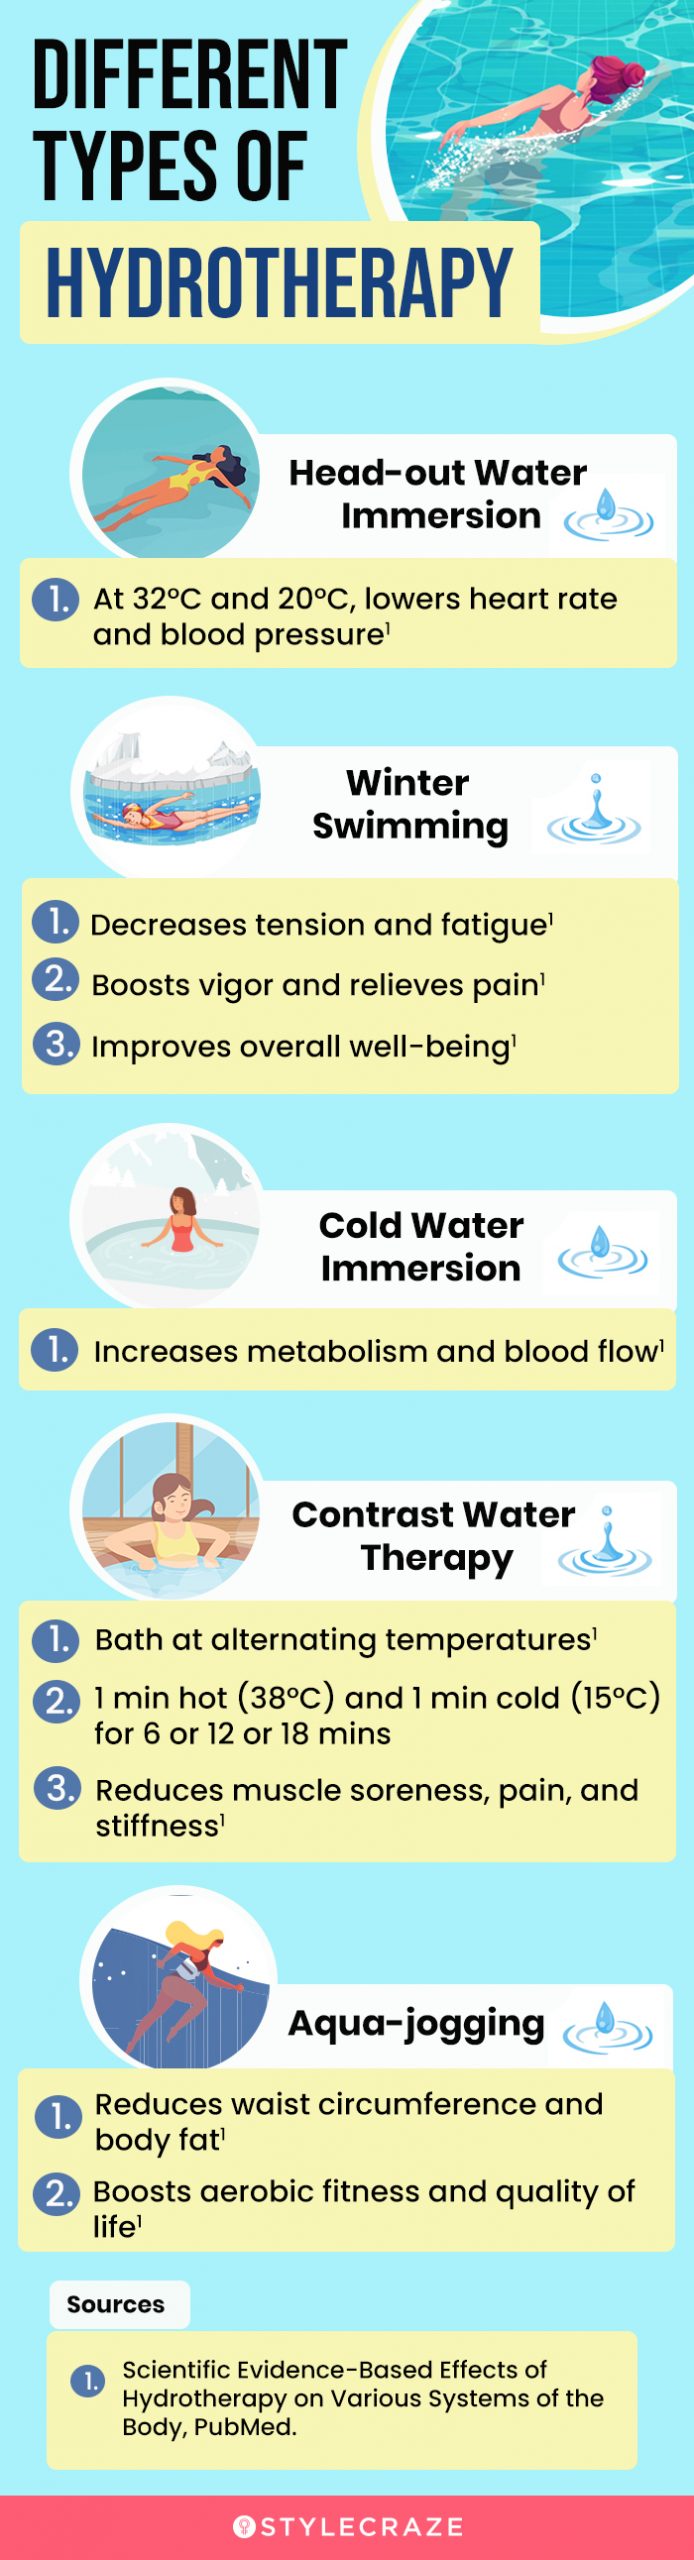 different types of hydrotherapy (infographic)